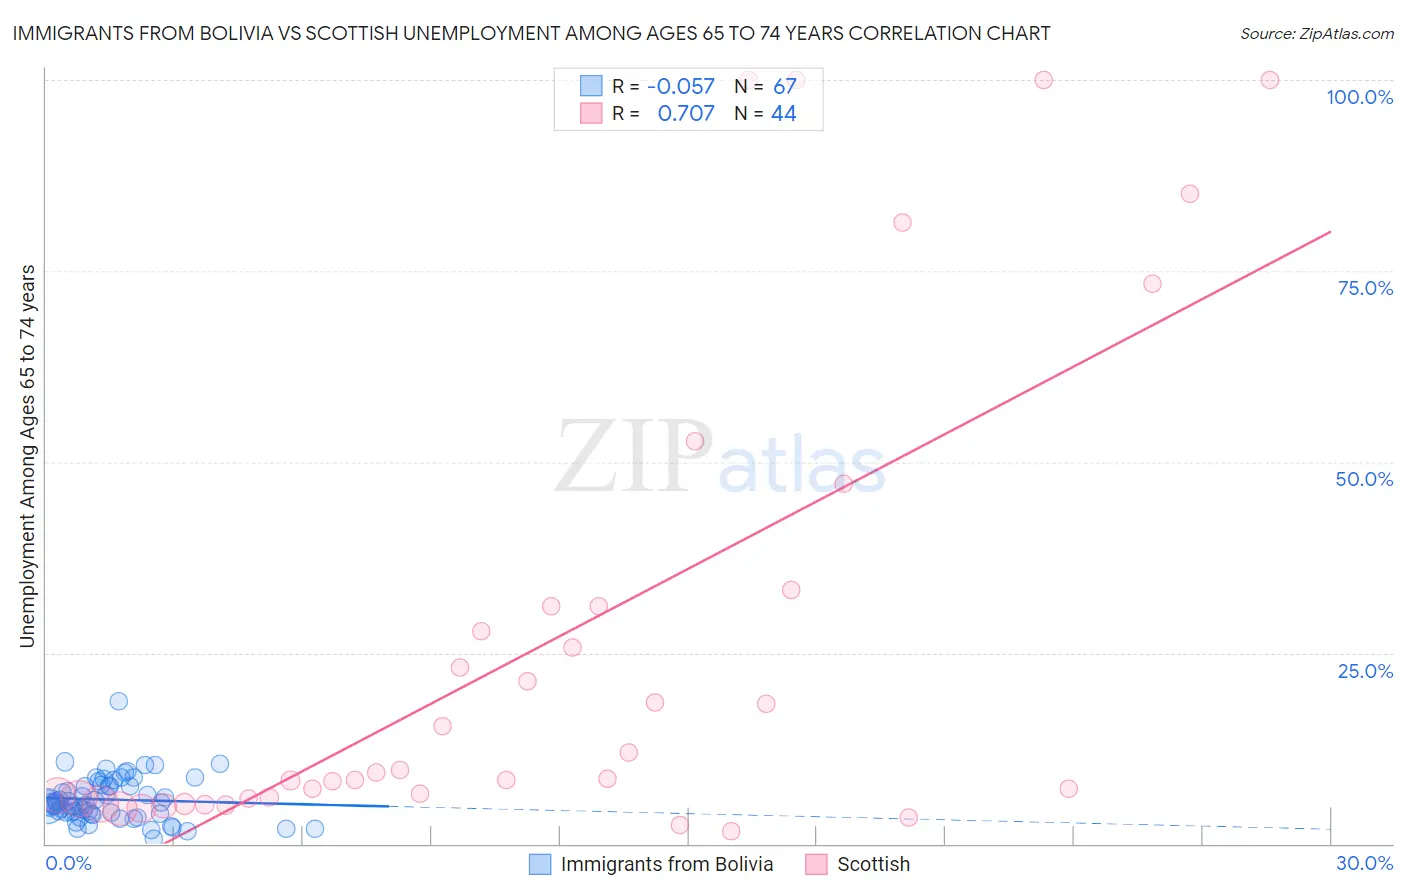 Immigrants from Bolivia vs Scottish Unemployment Among Ages 65 to 74 years